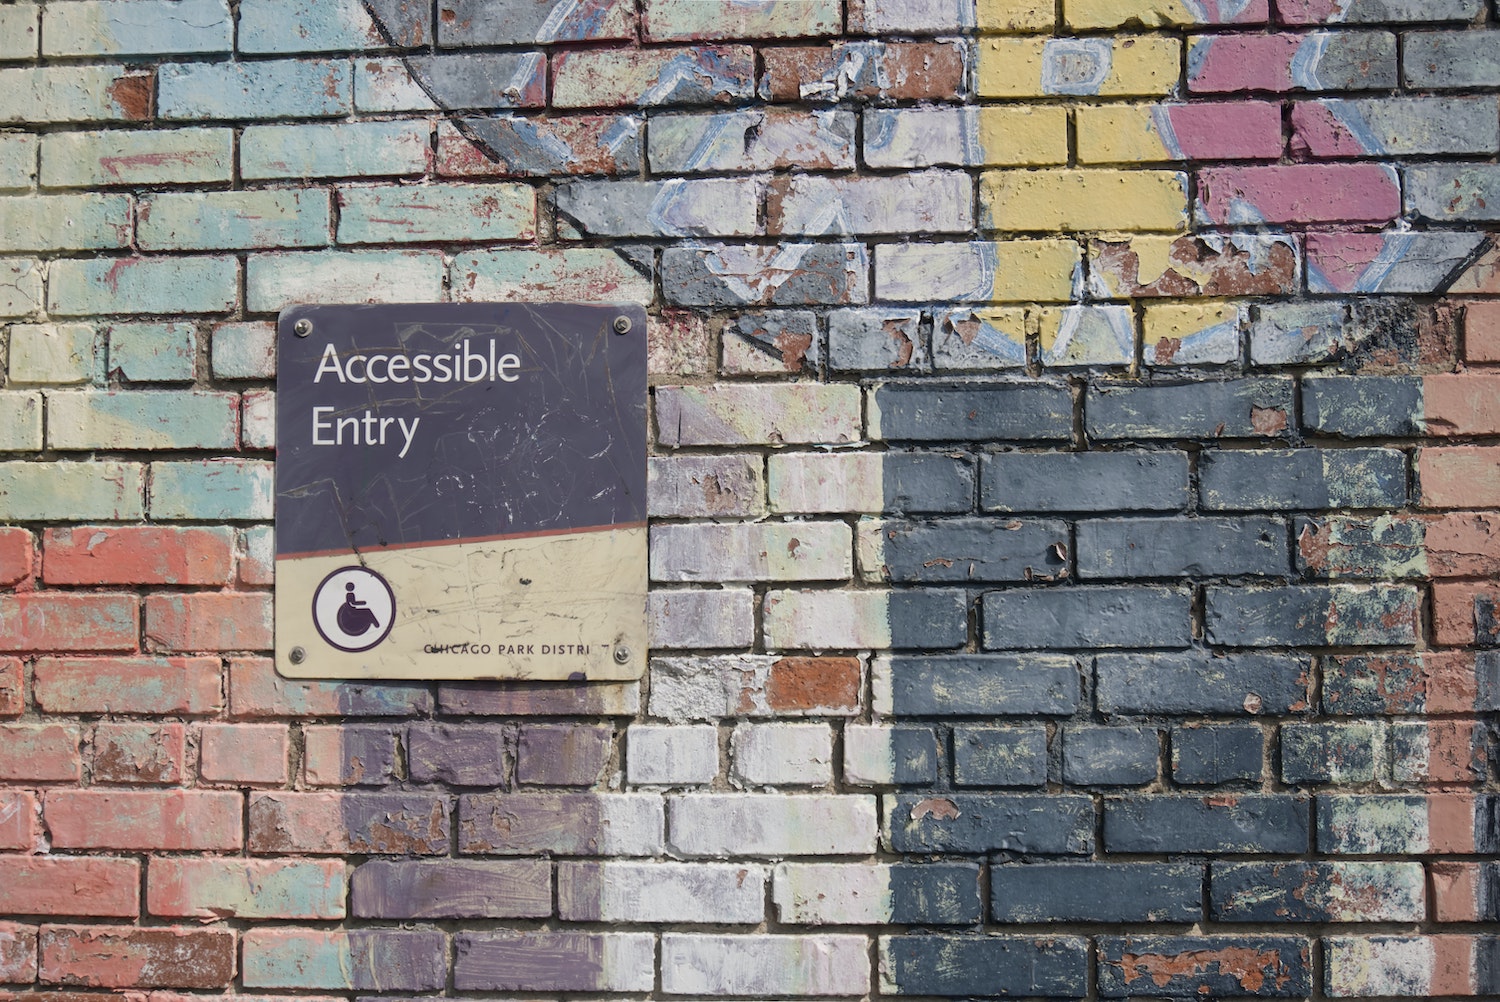 How to write accessibly and make your content better for everyone